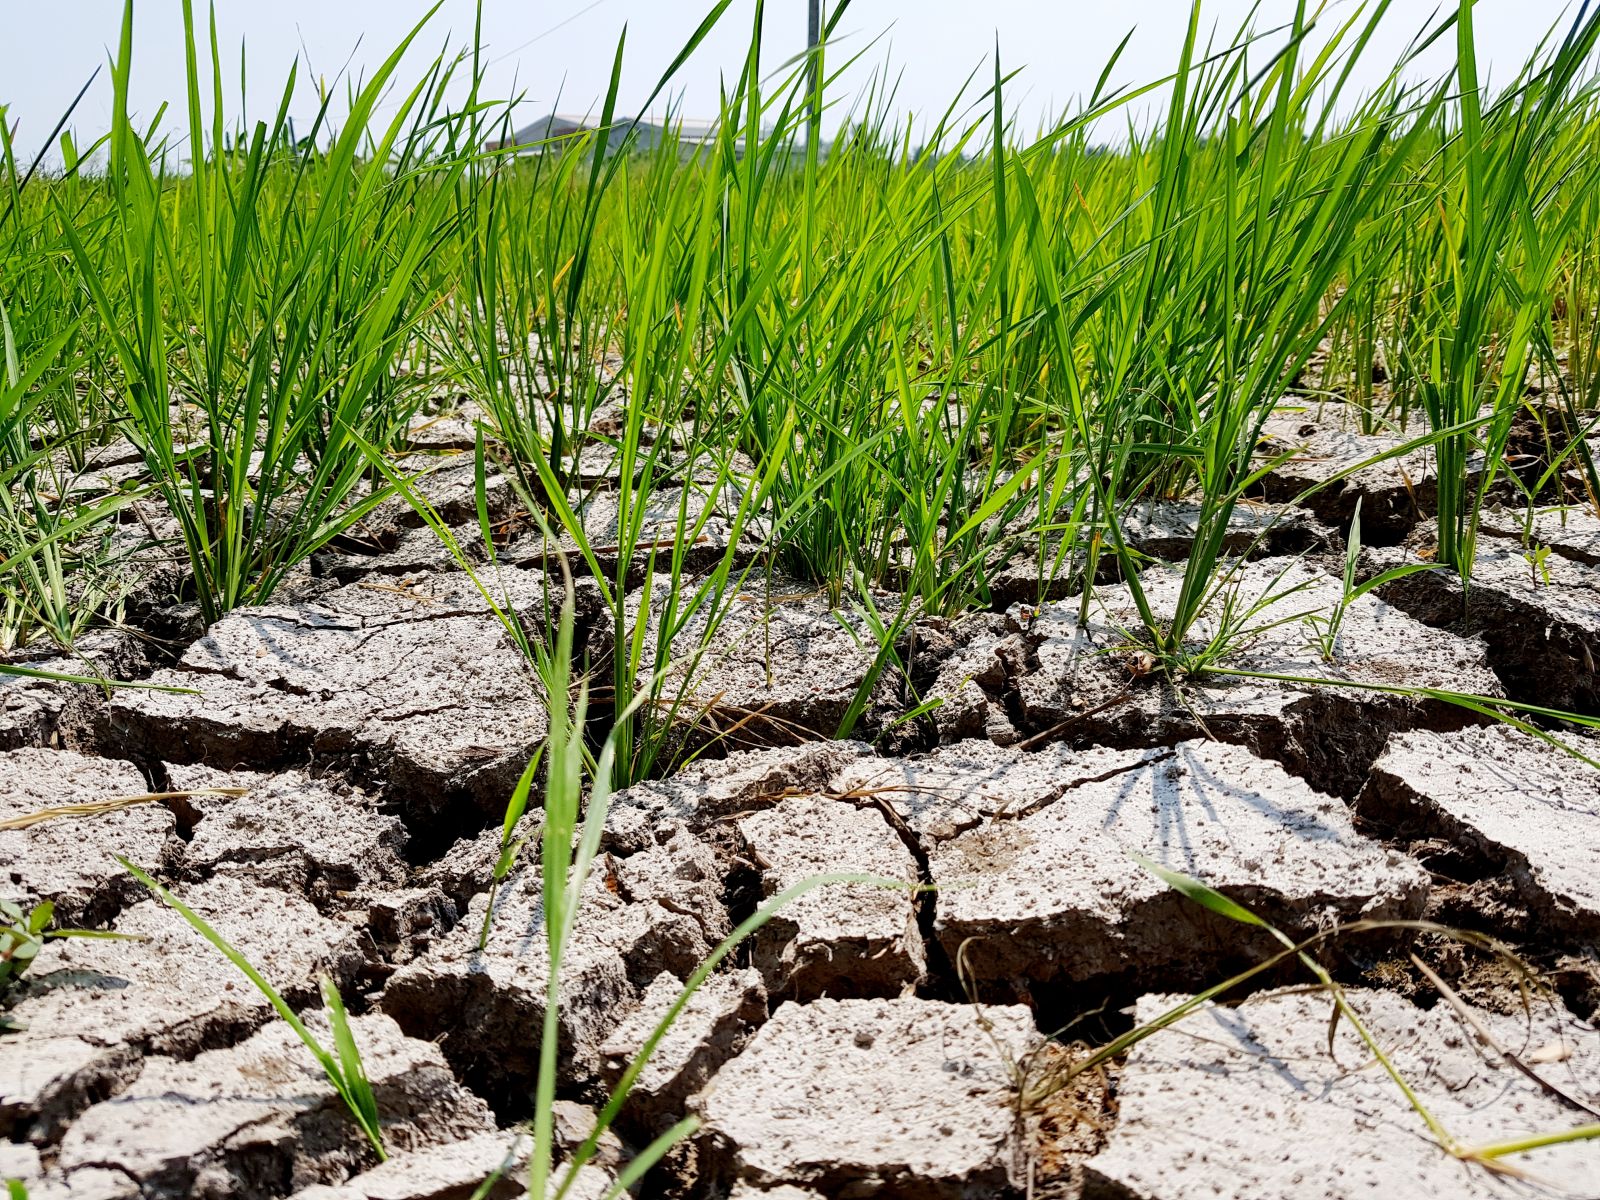 Thousands of hectares of rice fields in the MRD are affected by drought and salinity